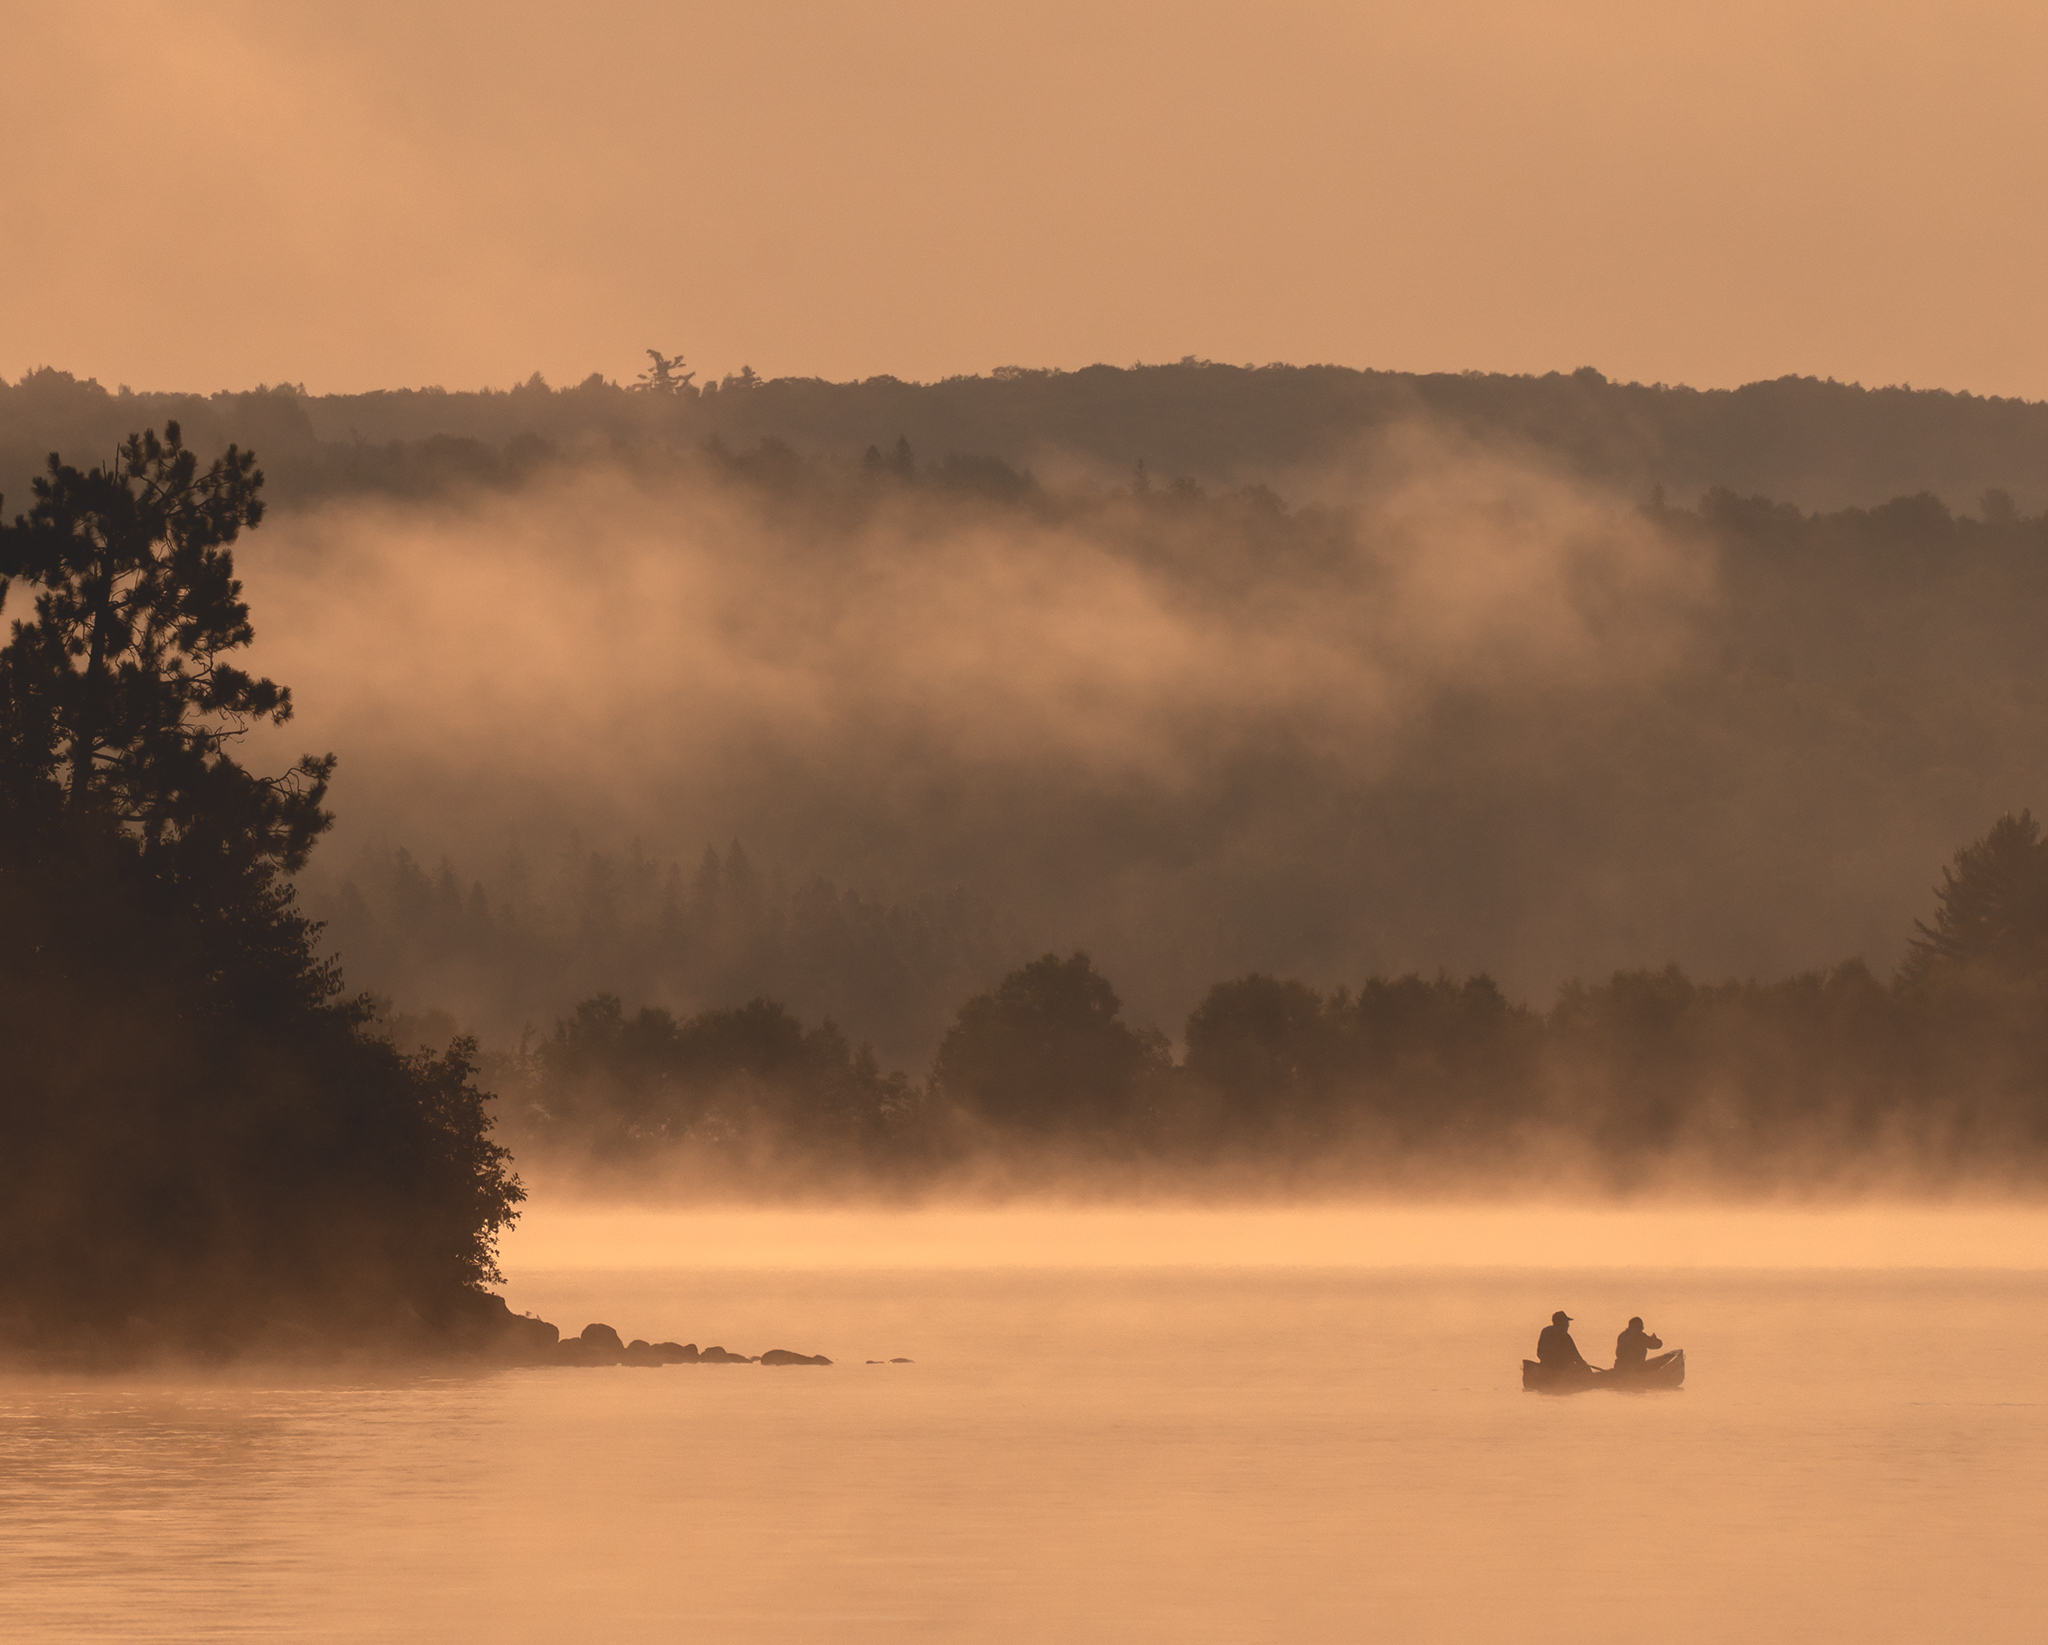 two canoeists on misty water at dusk